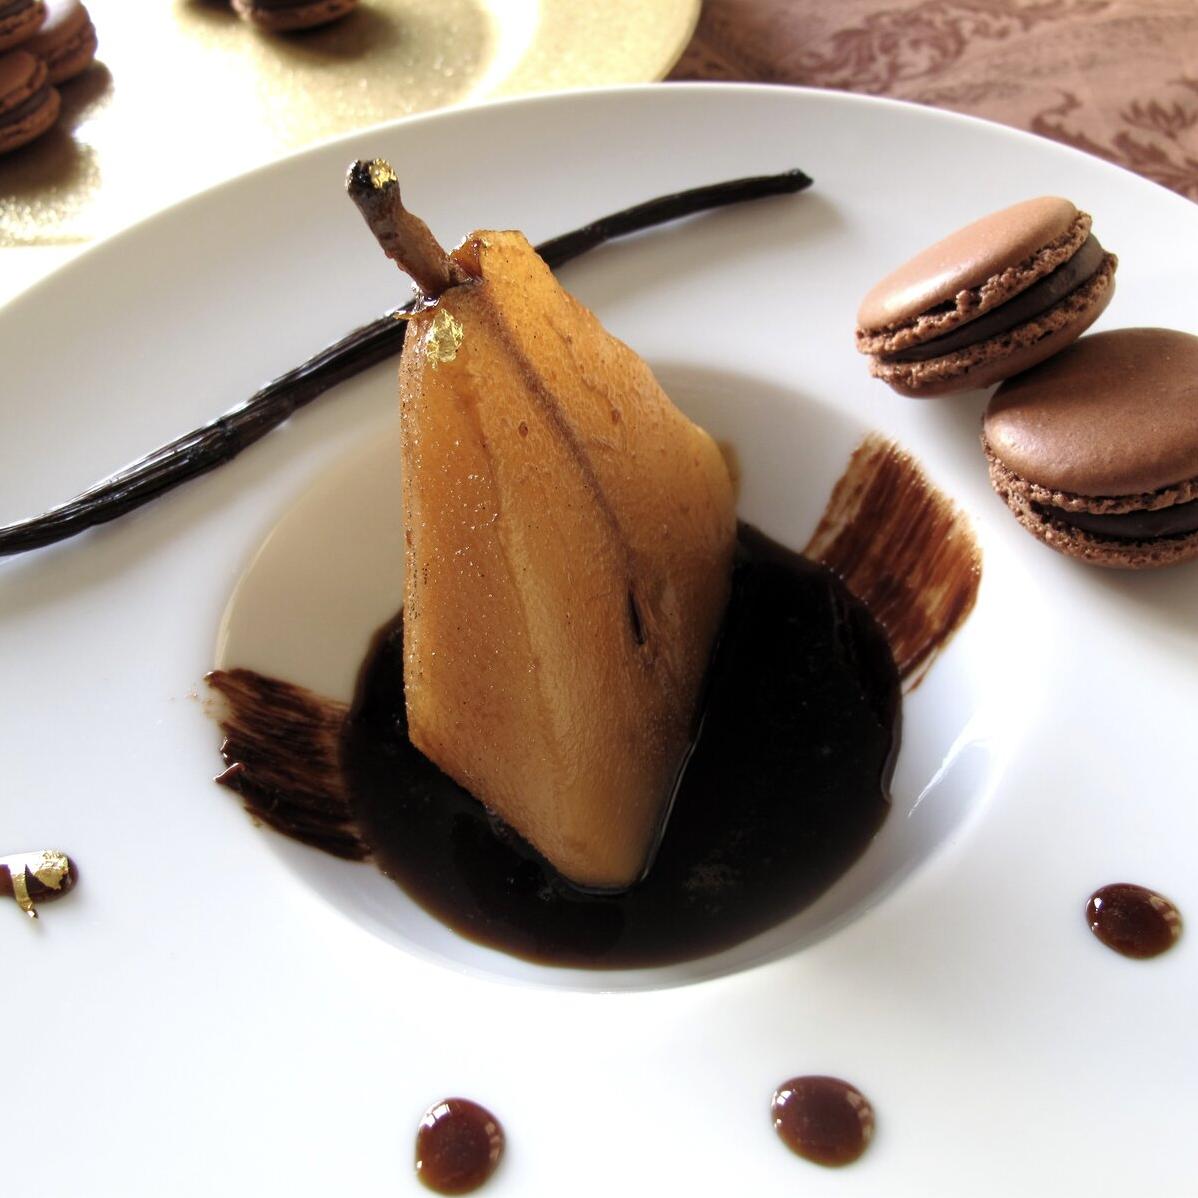  The perfect dessert for coffee and chocolate lovers.